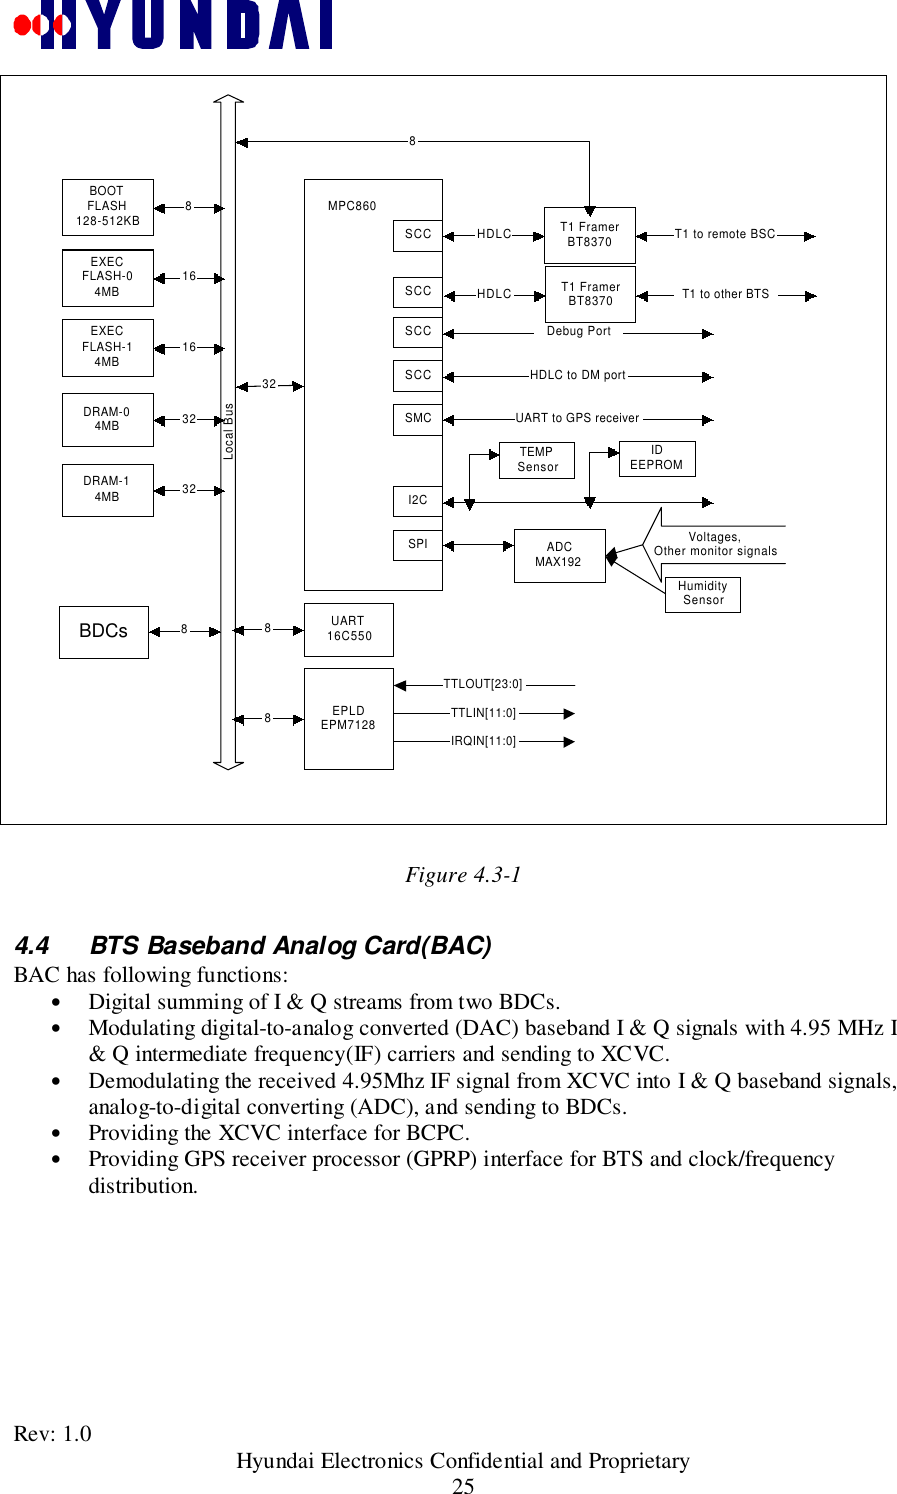 Rev: 1.0                                           Hyundai Electronics Confidential and Proprietary25Figure 4.3-14.4  BTS Baseband Analog Card(BAC)BAC has following functions:• Digital summing of I &amp; Q streams from two BDCs.• Modulating digital-to-analog converted (DAC) baseband I &amp; Q signals with 4.95 MHz I&amp; Q intermediate frequency(IF) carriers and sending to XCVC.• Demodulating the received 4.95Mhz IF signal from XCVC into I &amp; Q baseband signals,analog-to-digital converting (ADC), and sending to BDCs.• Providing the XCVC interface for BCPC.• Providing GPS receiver processor (GPRP) interface for BTS and clock/frequencydistribution.BOOTFLASH128-512KBEXECFLASH-04MBEXECFLASH-14MBDRAM-04MBDRAM-14MBLocal Bus81616323232T1 FramerBT83708SCC HDLC T1 to remote BSCSCCSCC Debug PortSCC HDLC to DM portSMC UART to GPS receiverI2CTEMPSensorIDEEPROMUART16C5508EPLDEPM71288TTLIN[11:0]IRQIN[11:0]TTLOUT[23:0]ADCMAX192MPC860SPIHumiditySensorVoltages,Other monitor signalsT1 FramerBT8370HDLC T1 to other BTSBDCs8